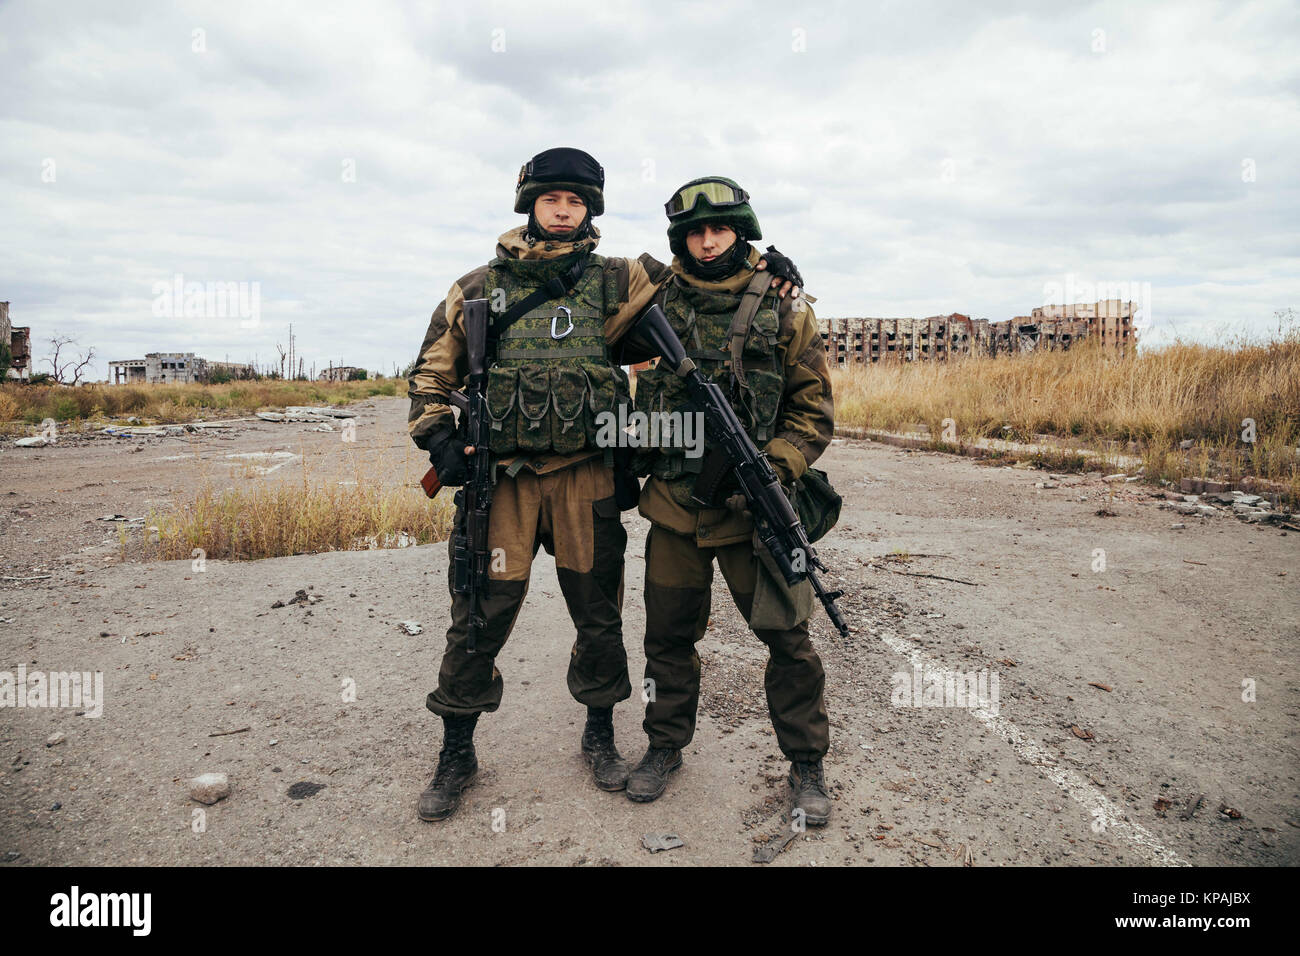 Donetsk, Donbass, Ukraine. 18th Sep, 2016. Soldiers from Sparta Battalion.Sparta battalion is an armed group formed by rebel separatist fighting in Donetsk area against Ukrainian central government since 2014. Credit: Joao Bolan/SOPA/ZUMA Wire/Alamy Live News Stock Photo